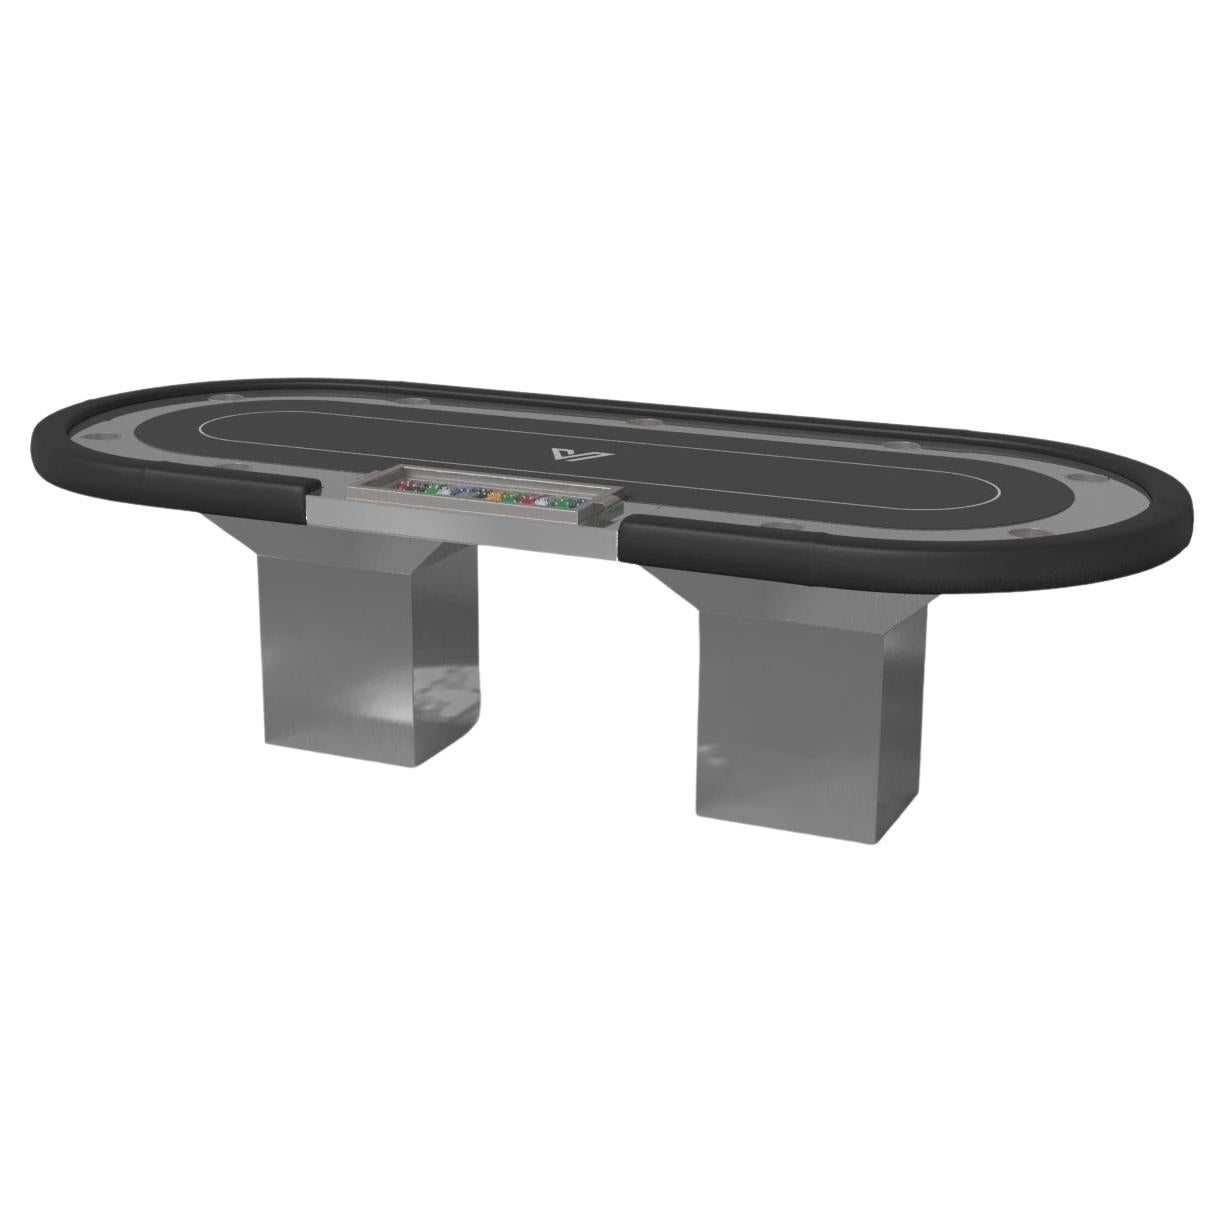 Elevate Customs Trestle Poker Tables / Stainless Steel Sheet Metal in 8'8" - USA For Sale